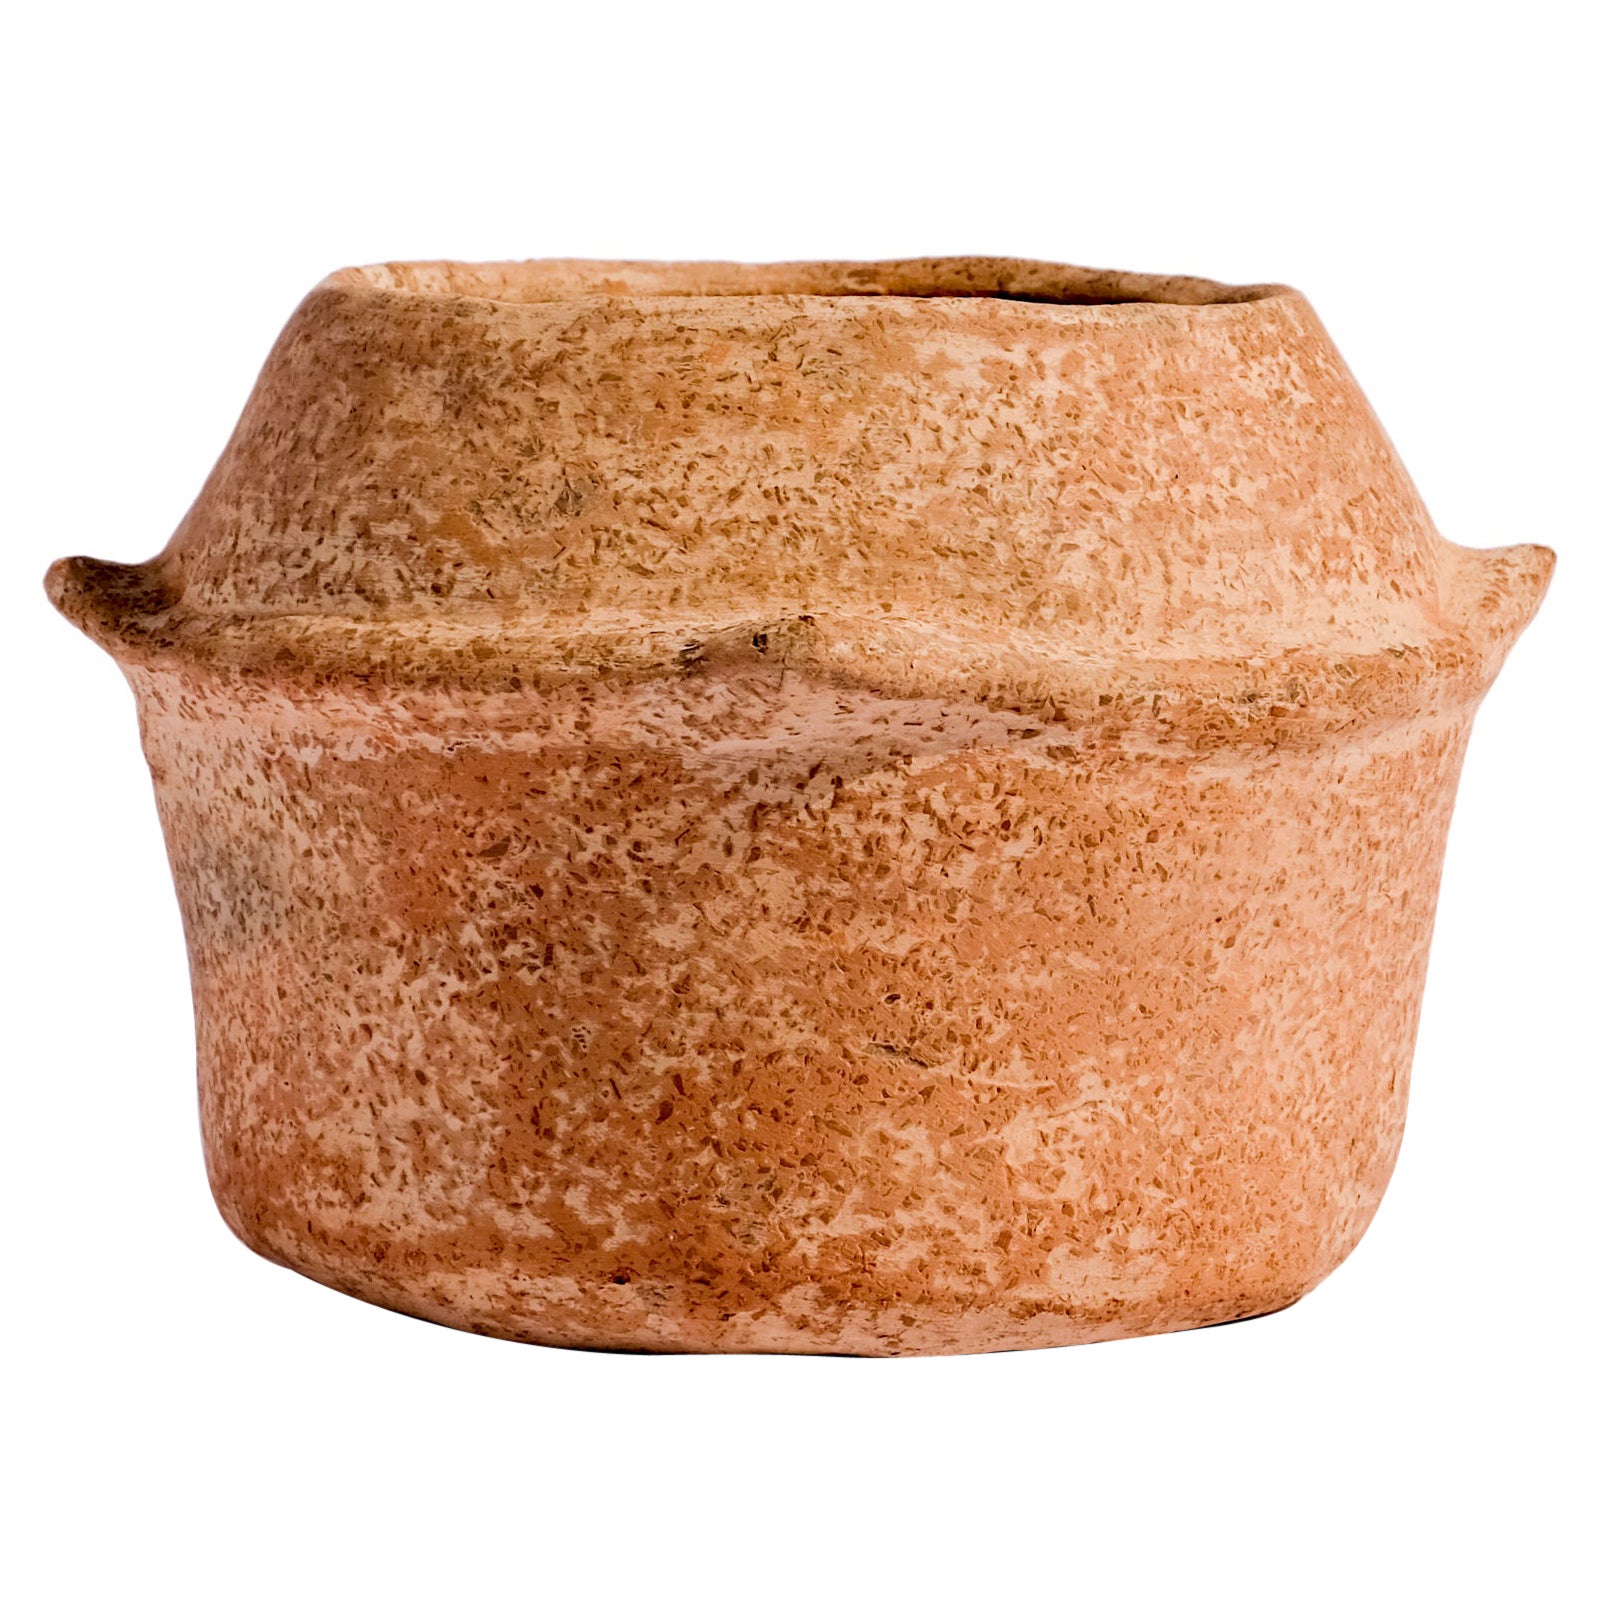 Freckles Terracotta Pot Made of Clay, Handcrafted by the Potter Raja